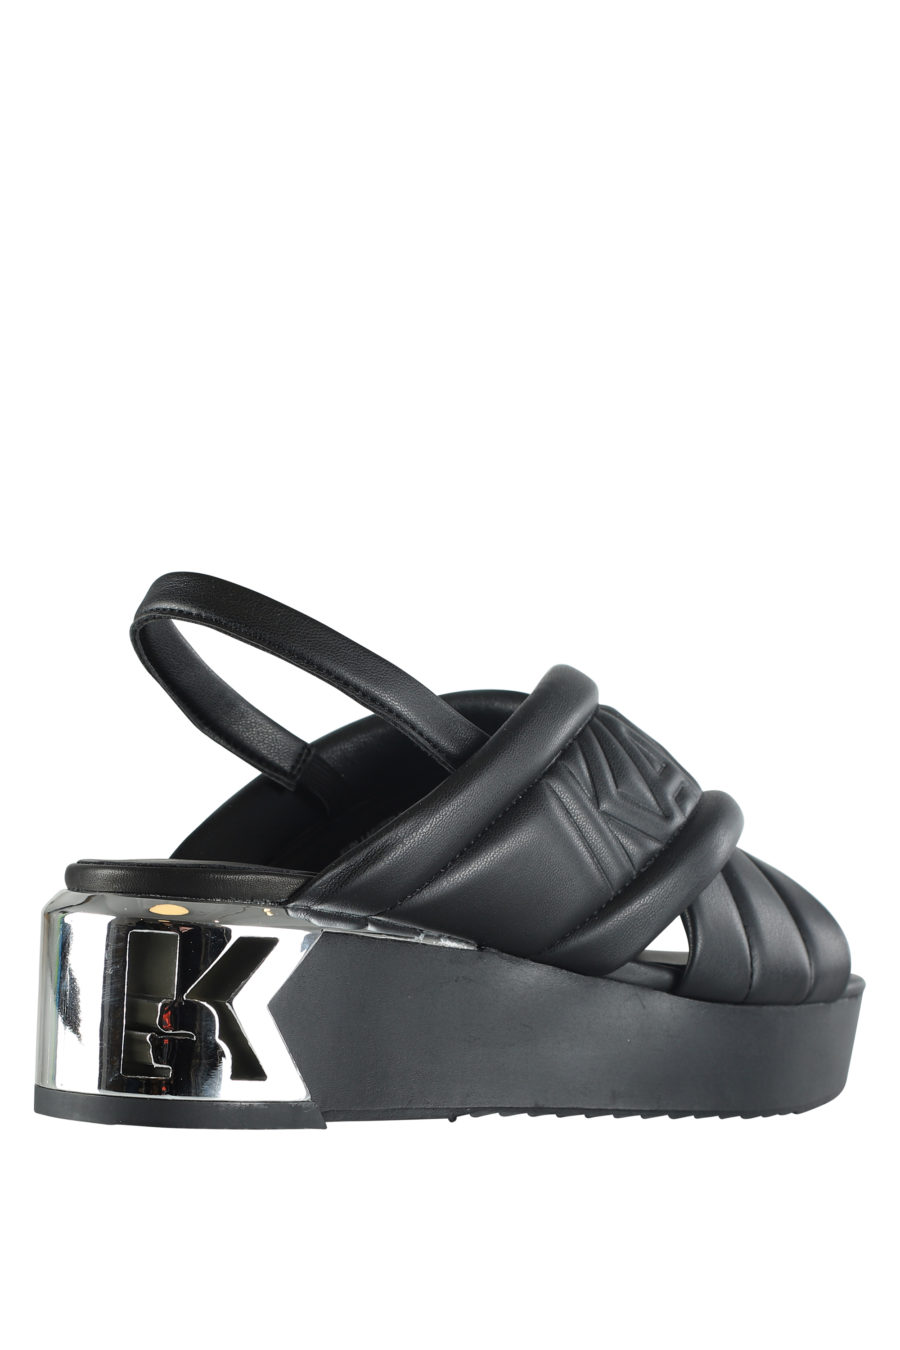 Black cushioned sandals with black logo and platform - IMG 5331